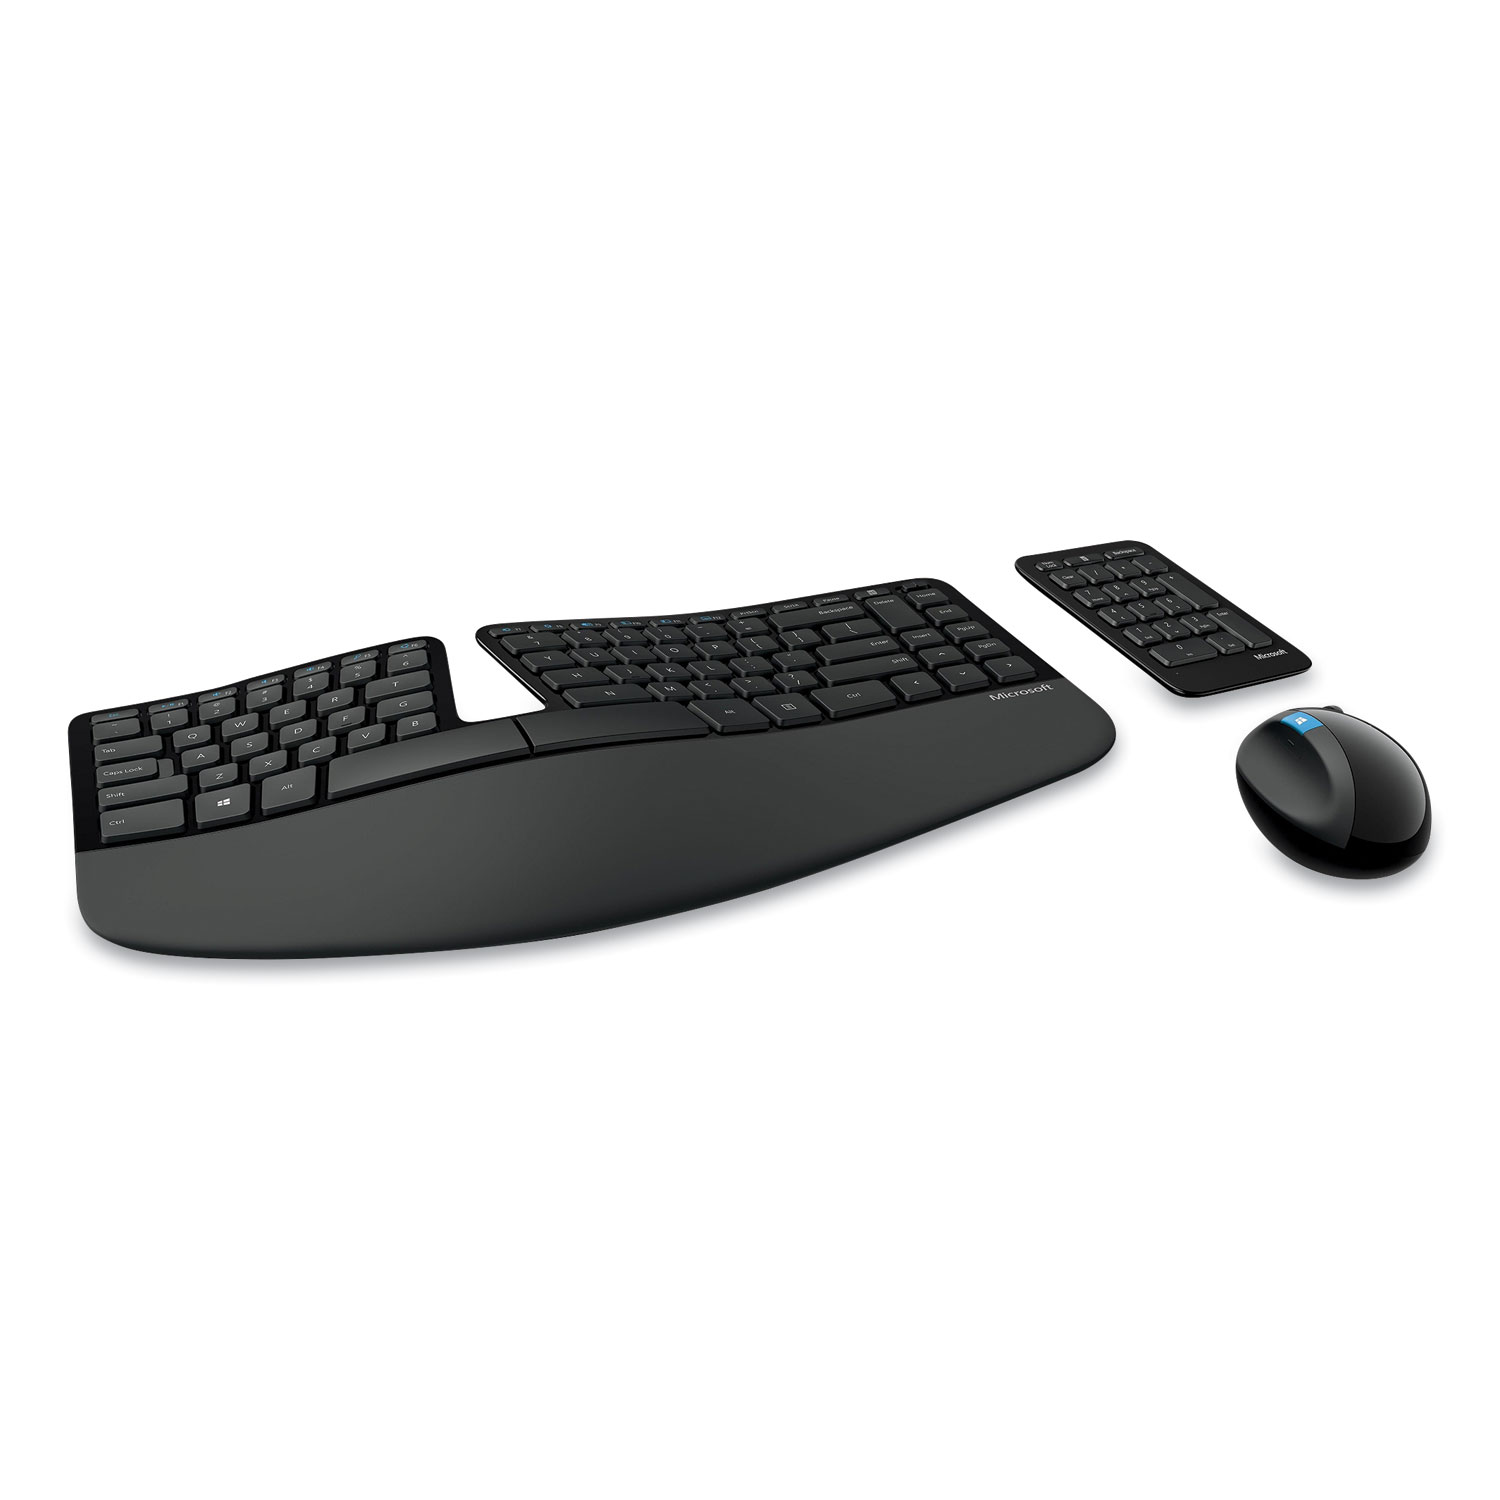 Microsoft® Sculpt Ergonomic Desktop Wireless Keyboard and Mouse Combo, 2.4 GHz Frequency, Black